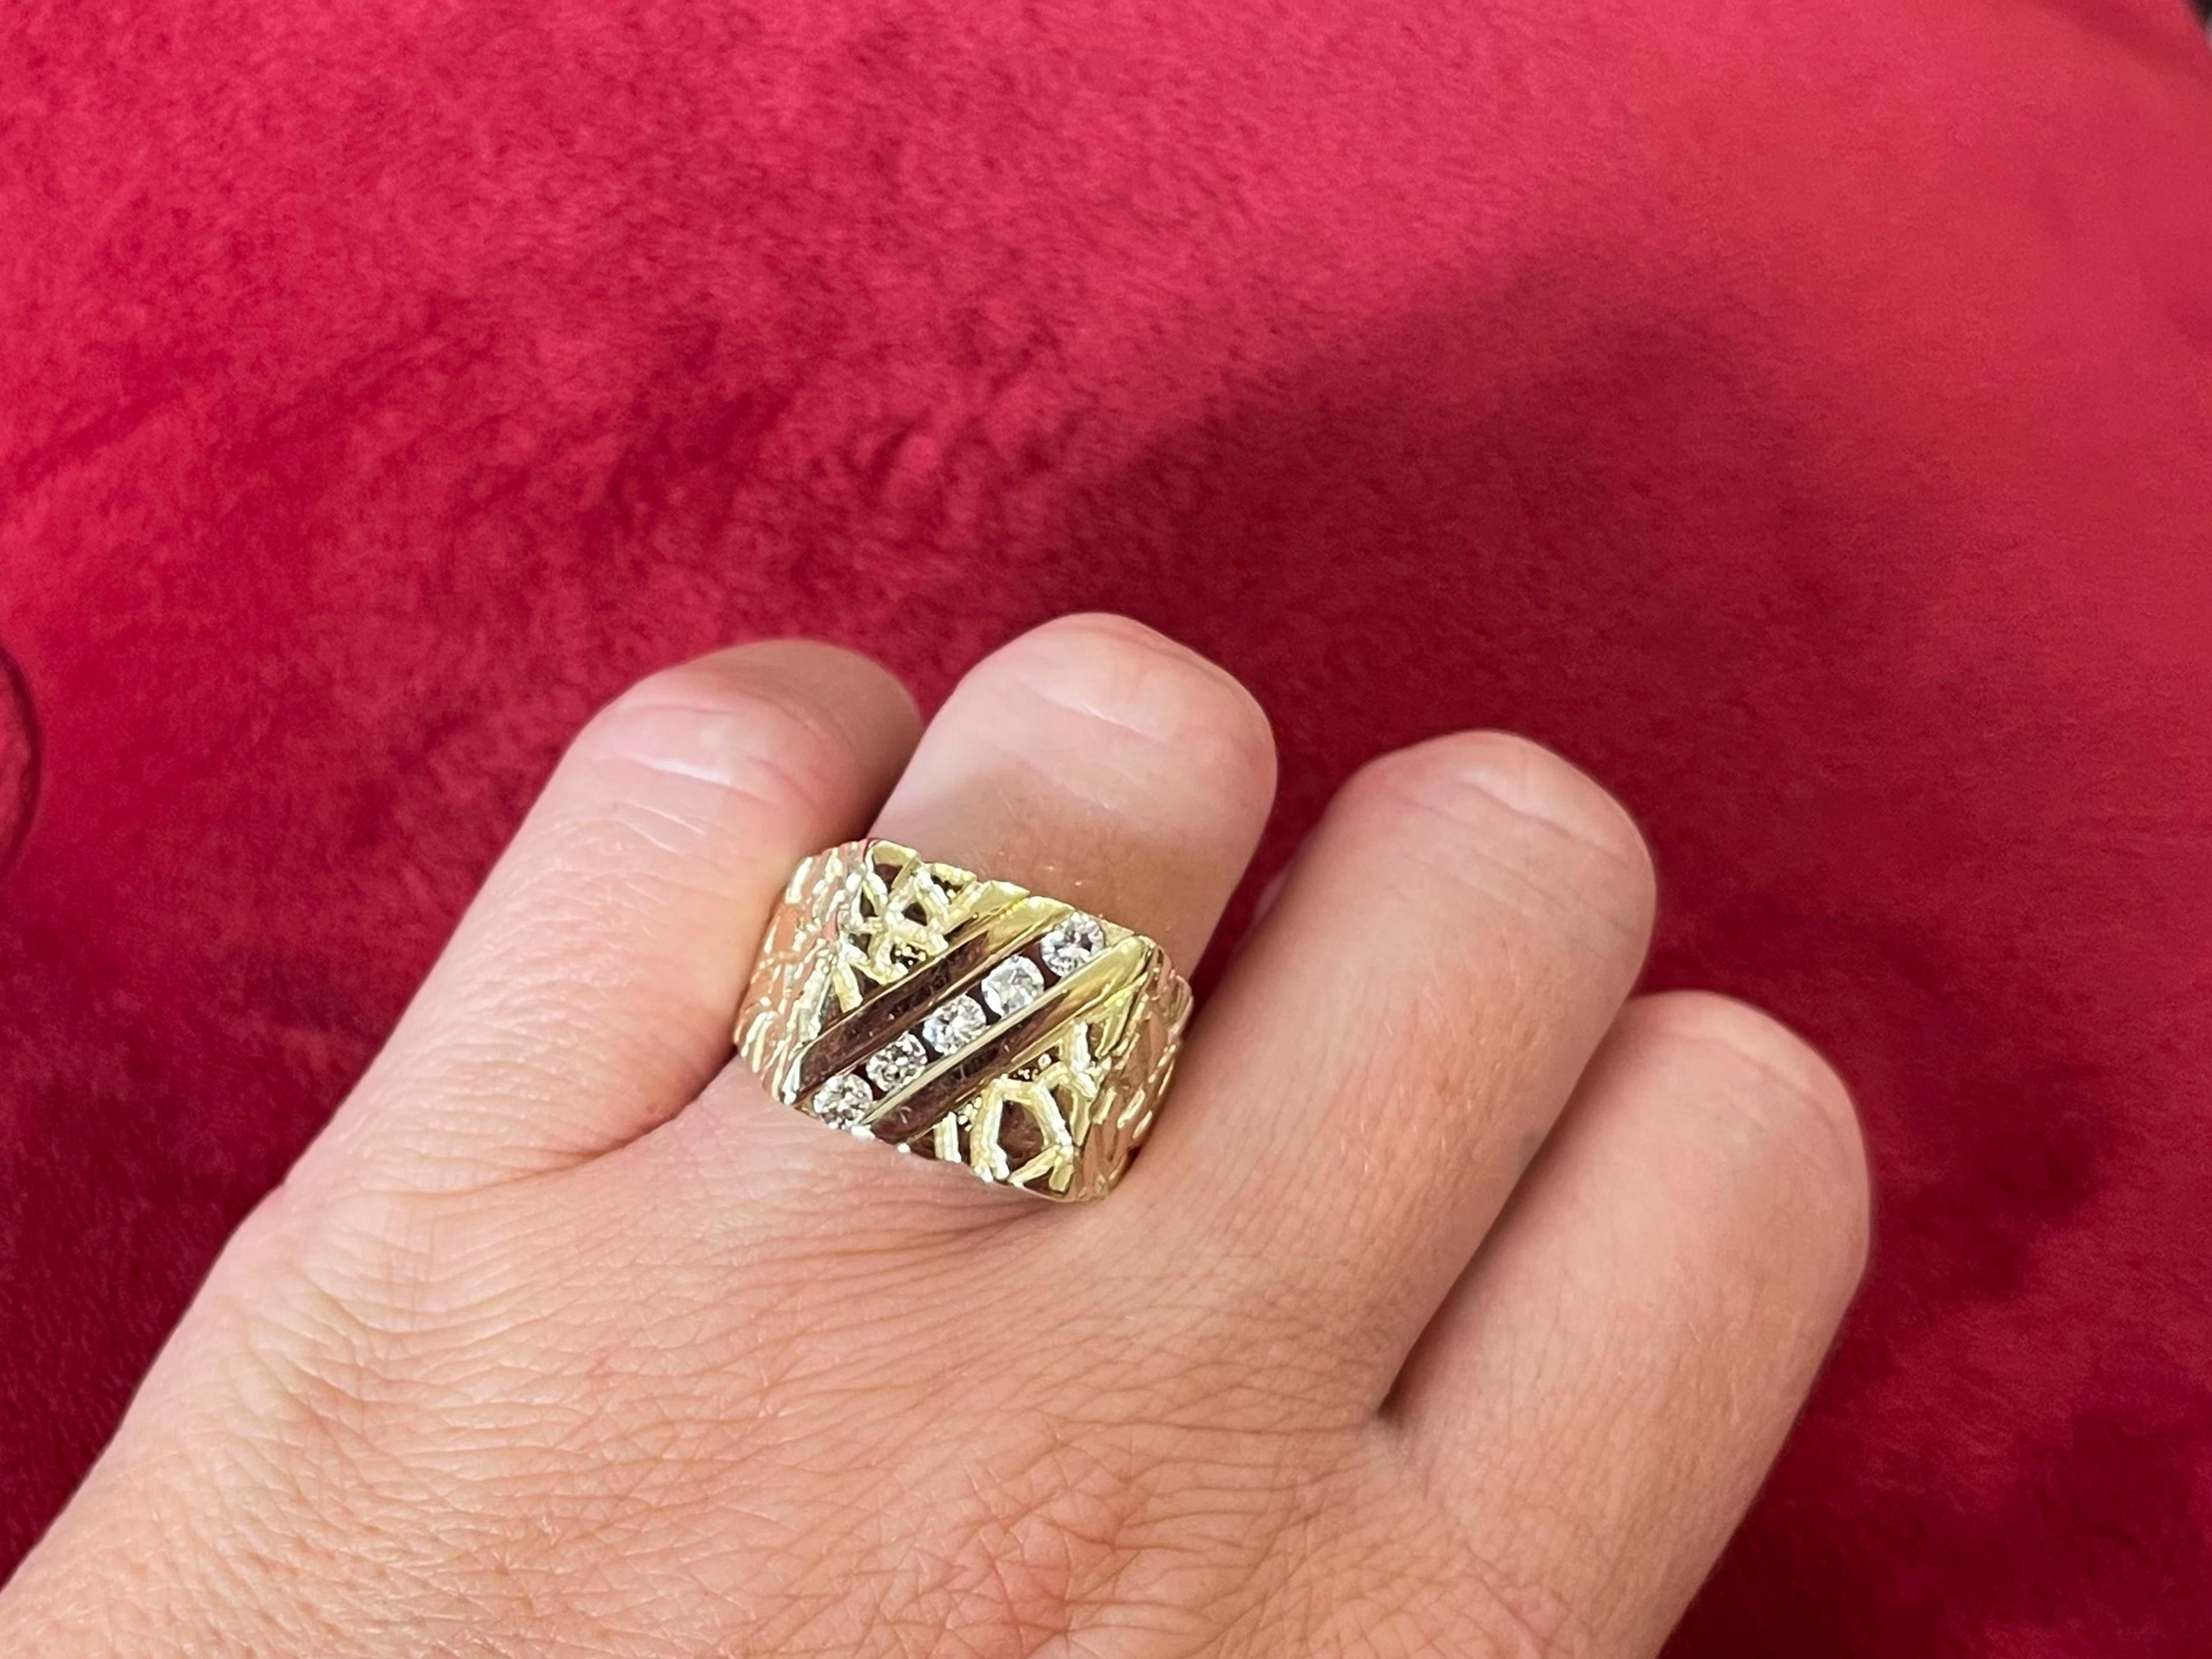 Item Specifications:

Metal: 14K Yellow Gold

Total Weight: 14.2 Grams

Ring Size: 10

Diamond Count: 5 Brilliant cut diamonds

Diamond Carat Weight: ~0.30 Carat

Diamond Color: G-H

Diamond Clarity: SI1-I1

Condition: Preowned, excellent

Stamped: